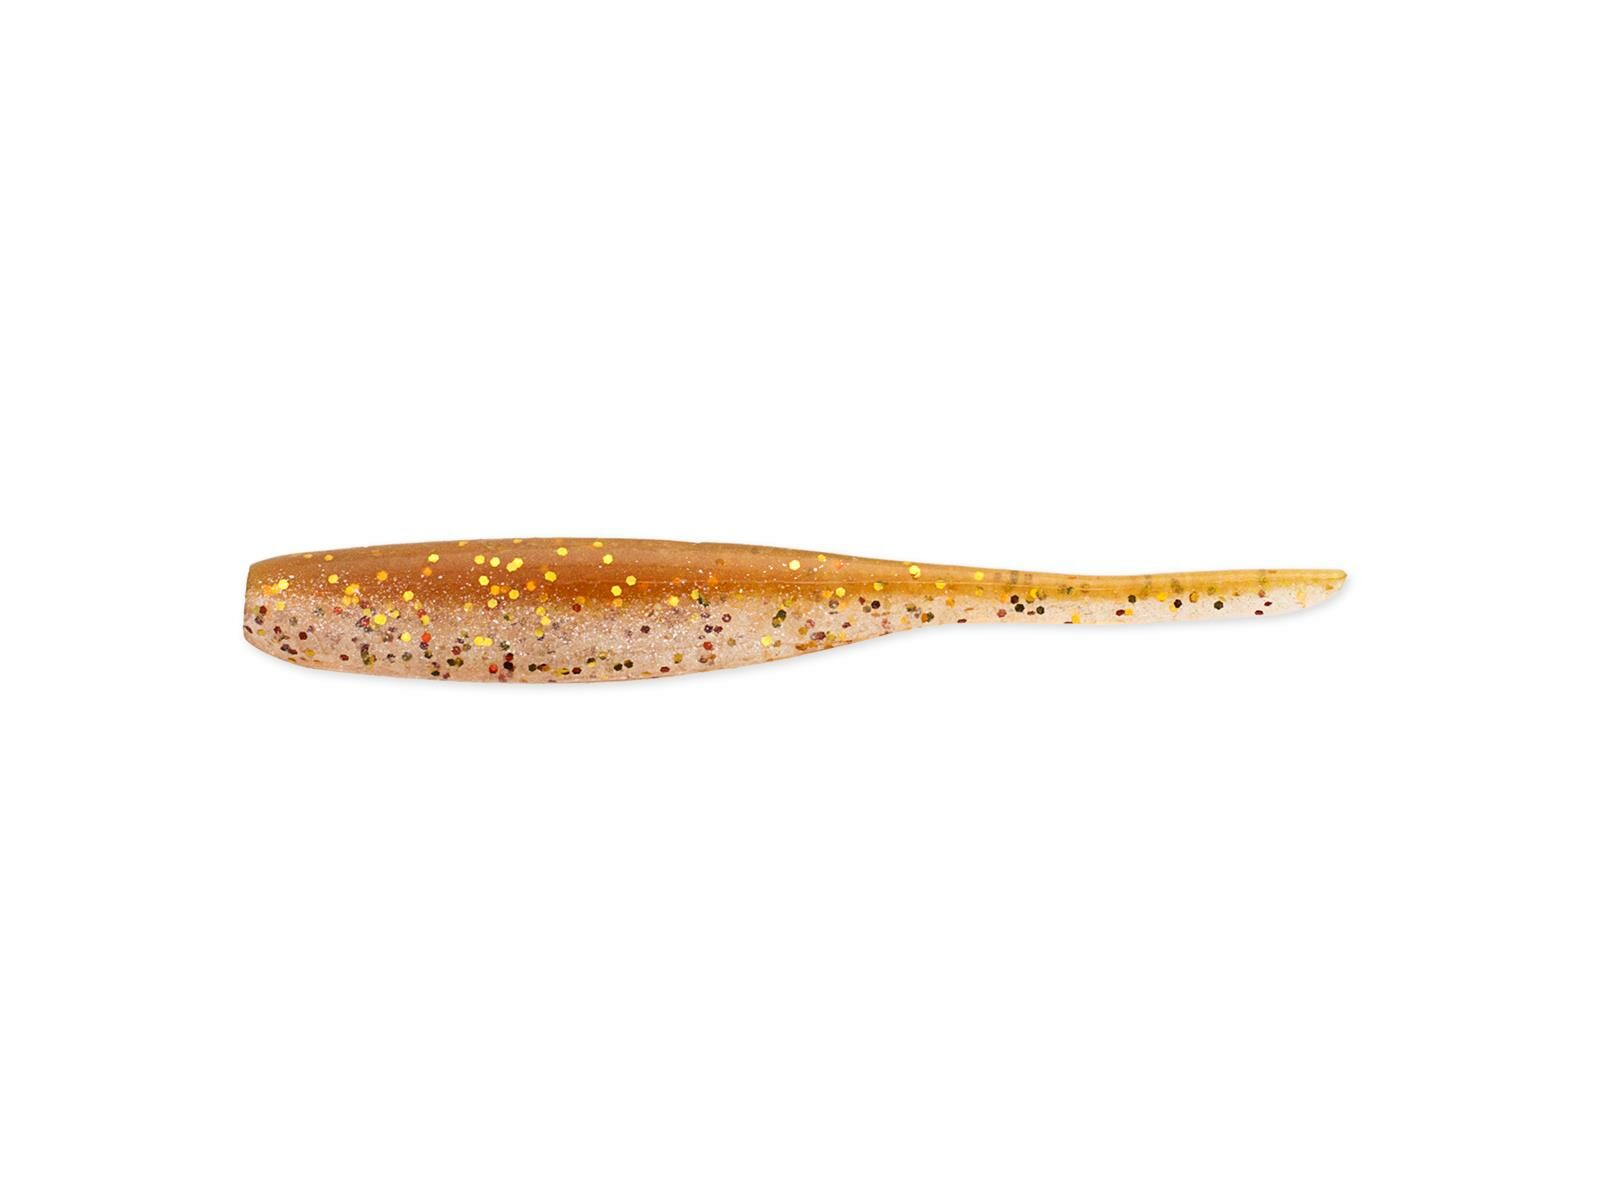 2" Shad Impact - Golden Goby (BA-Edition)